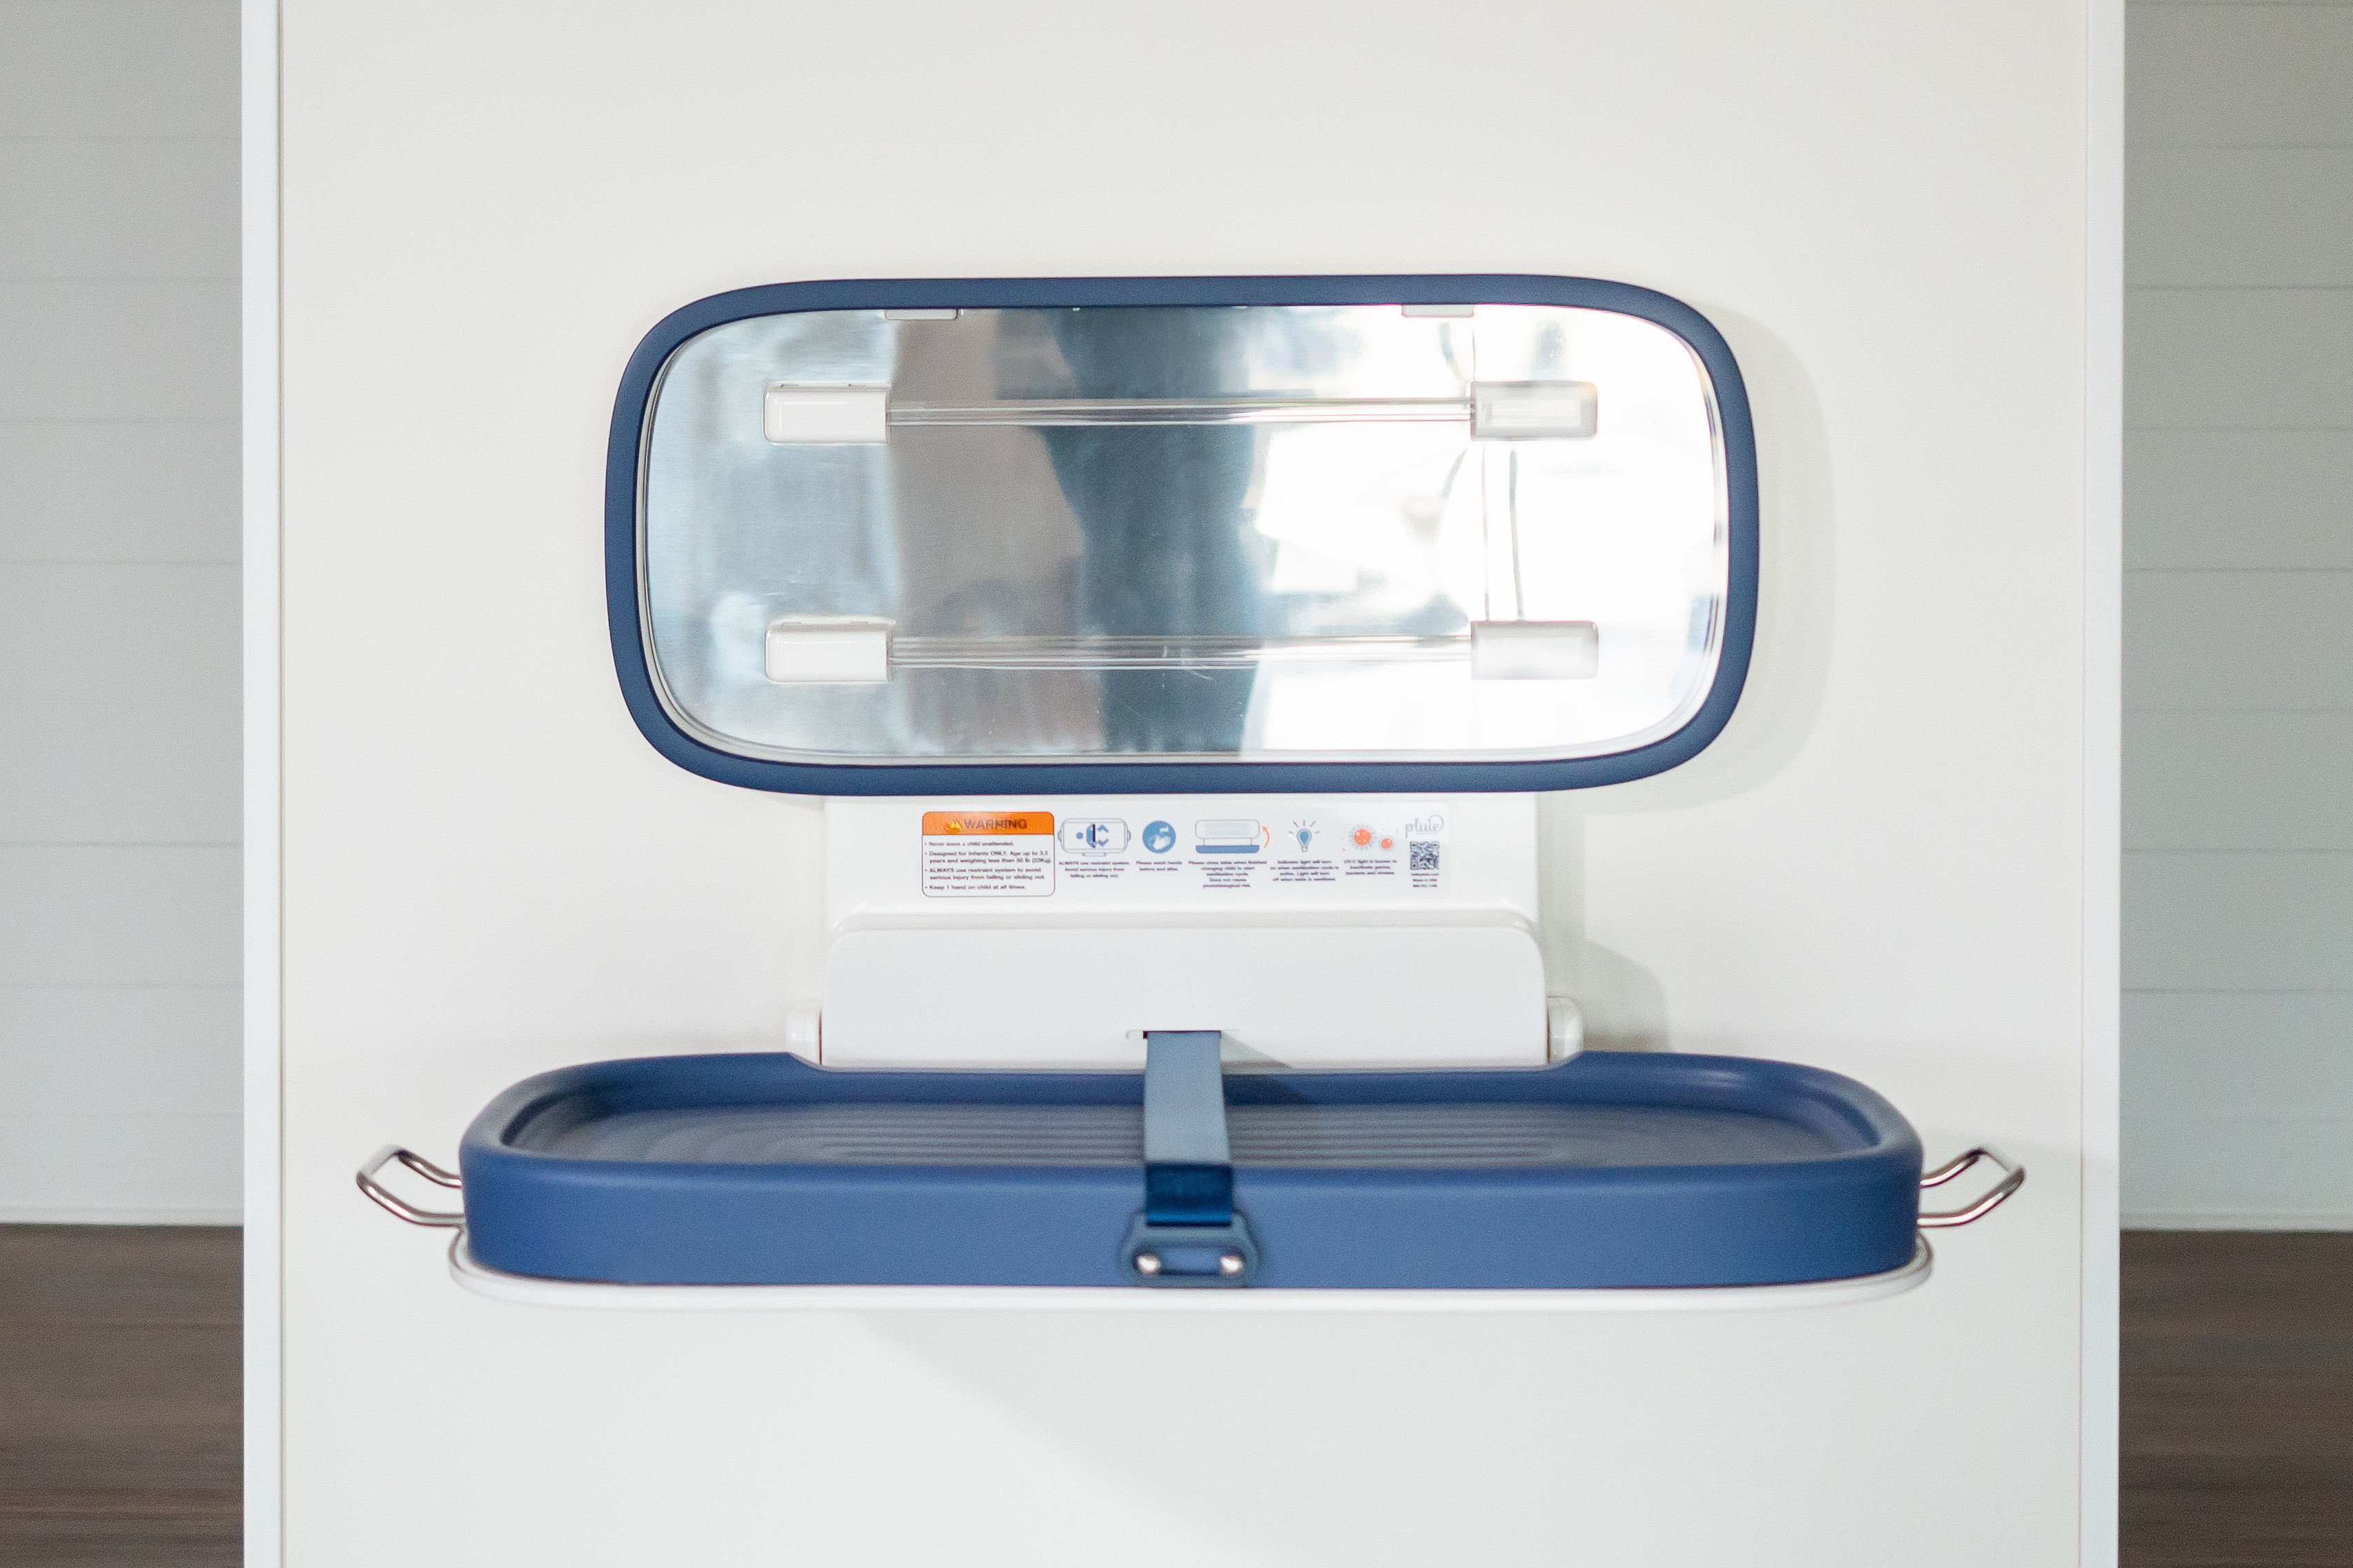 Pluie self-sanitizing diaper-changing table for public restrooms